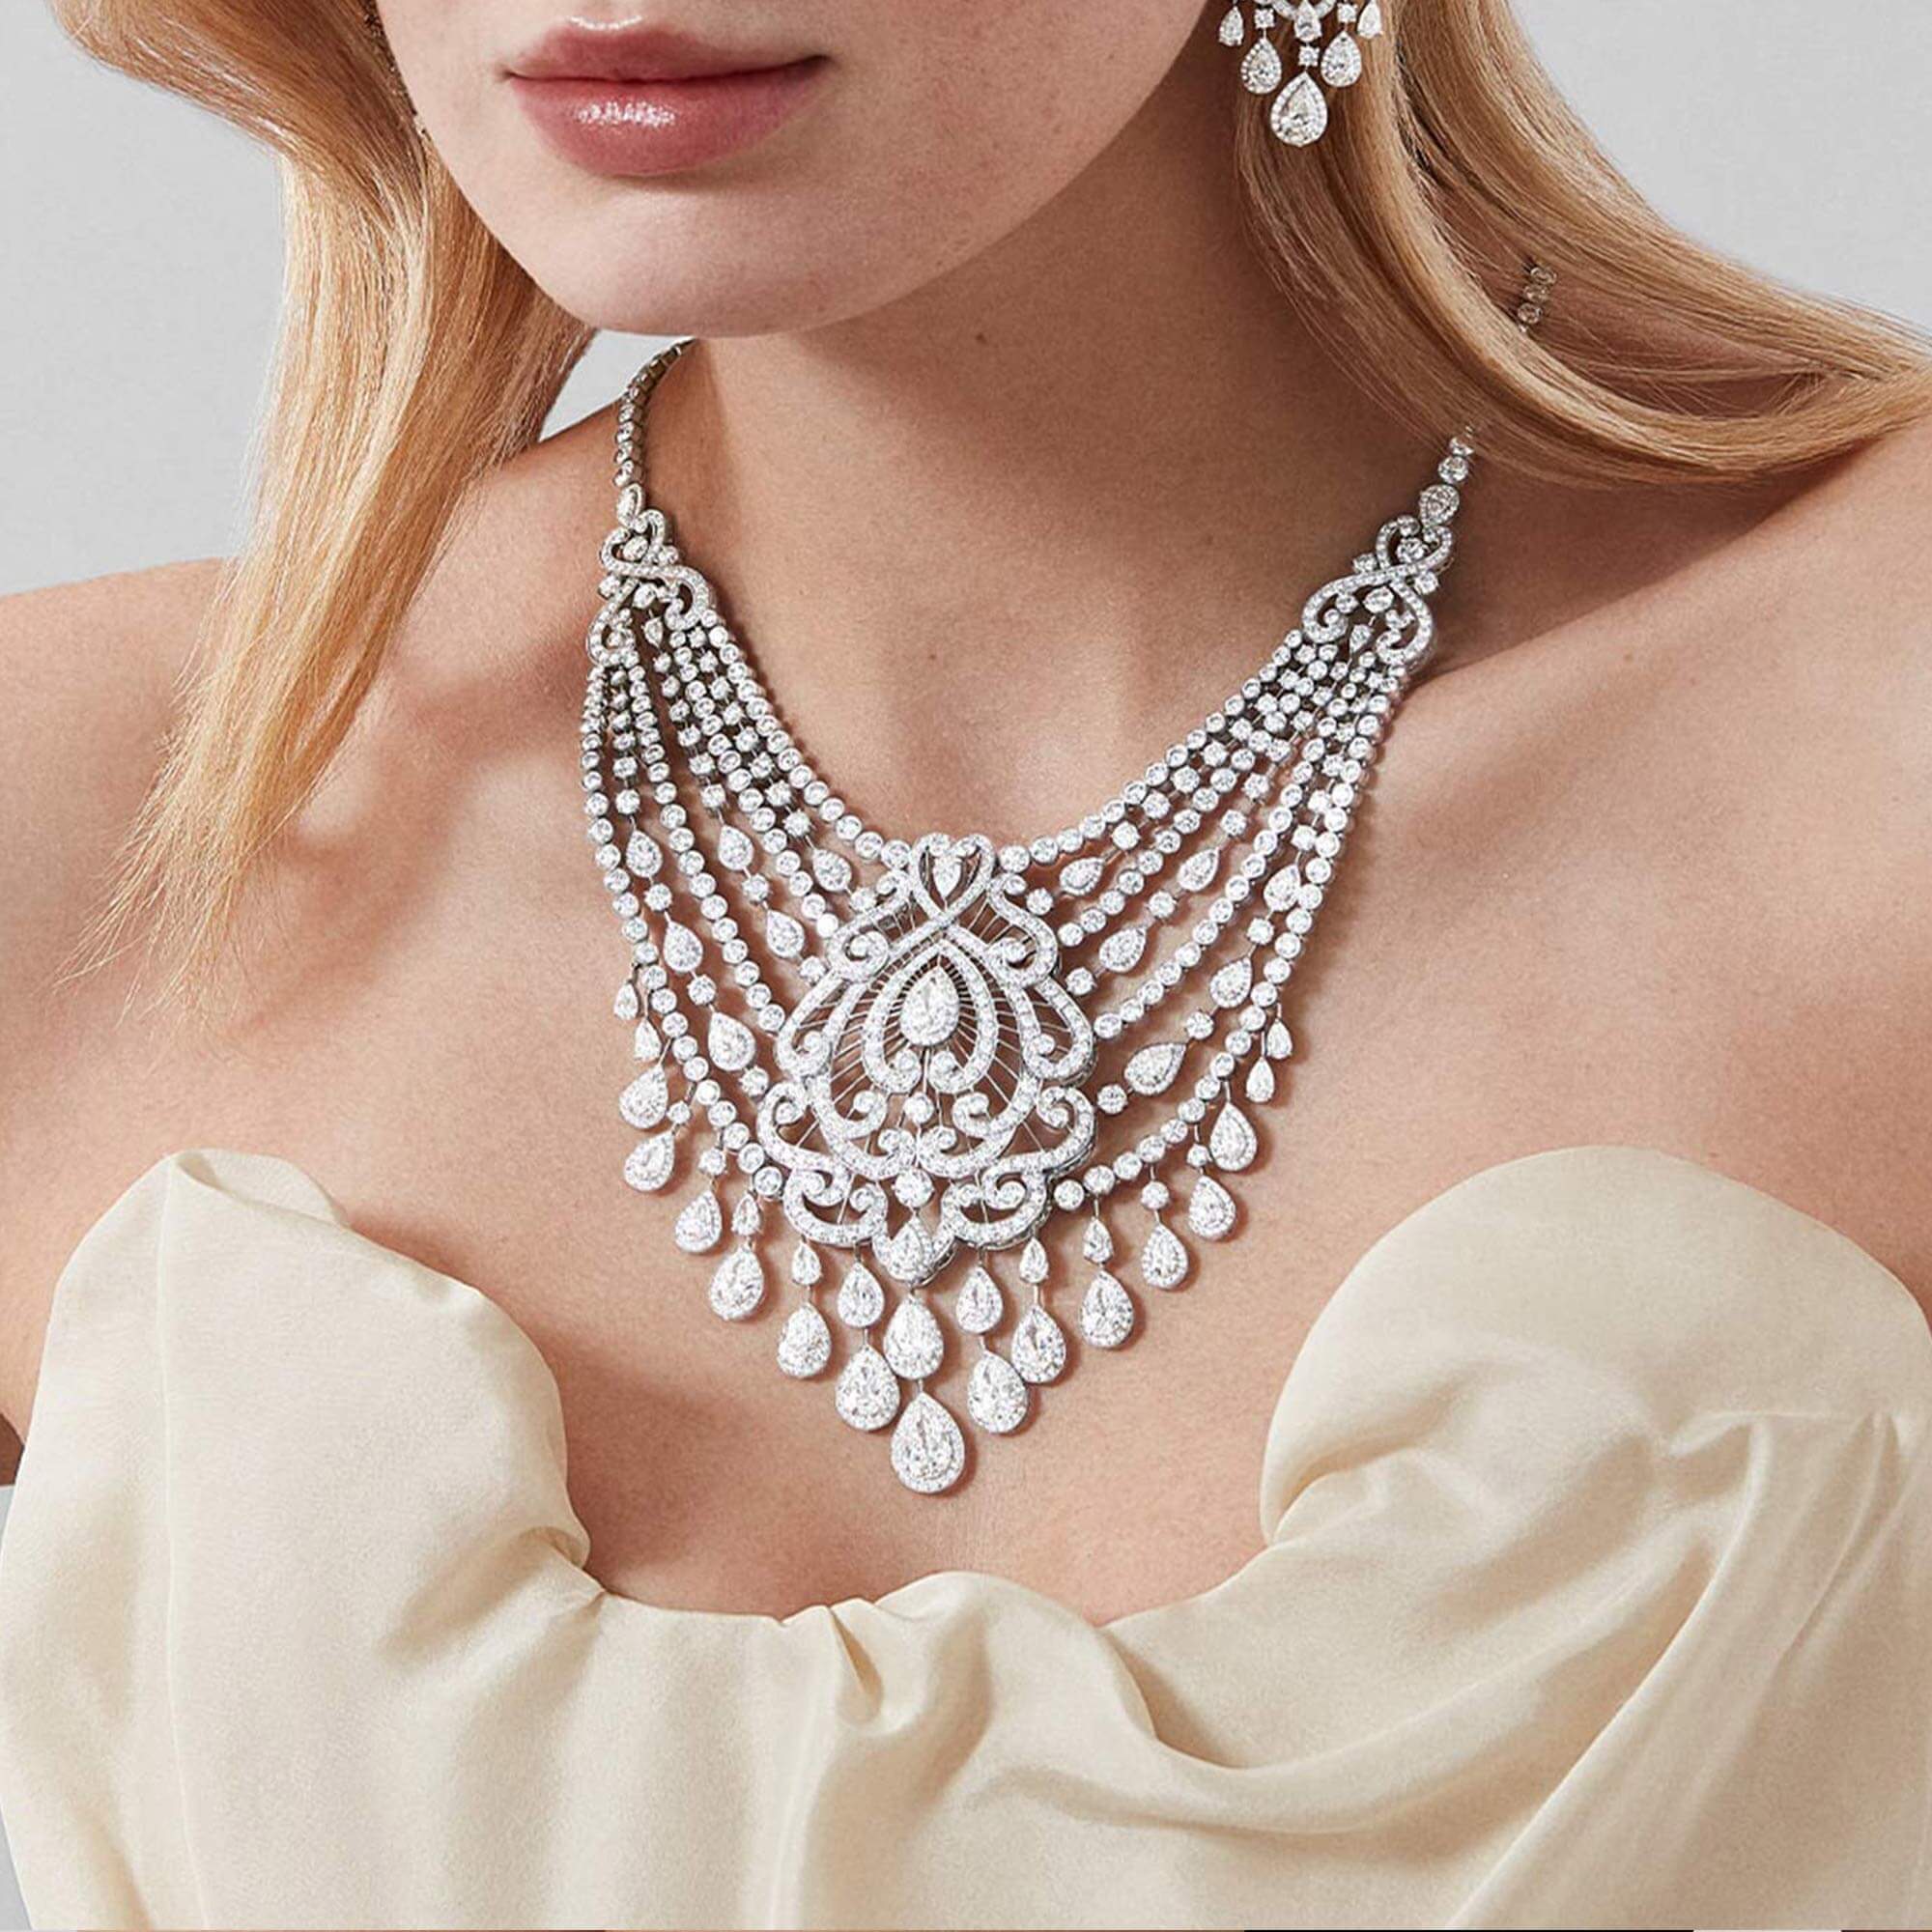 Garrard White Rose Transformable High Jewellery Diamond Necklace In 18ct White Gold 2015352 and earrings 2015372 model close up